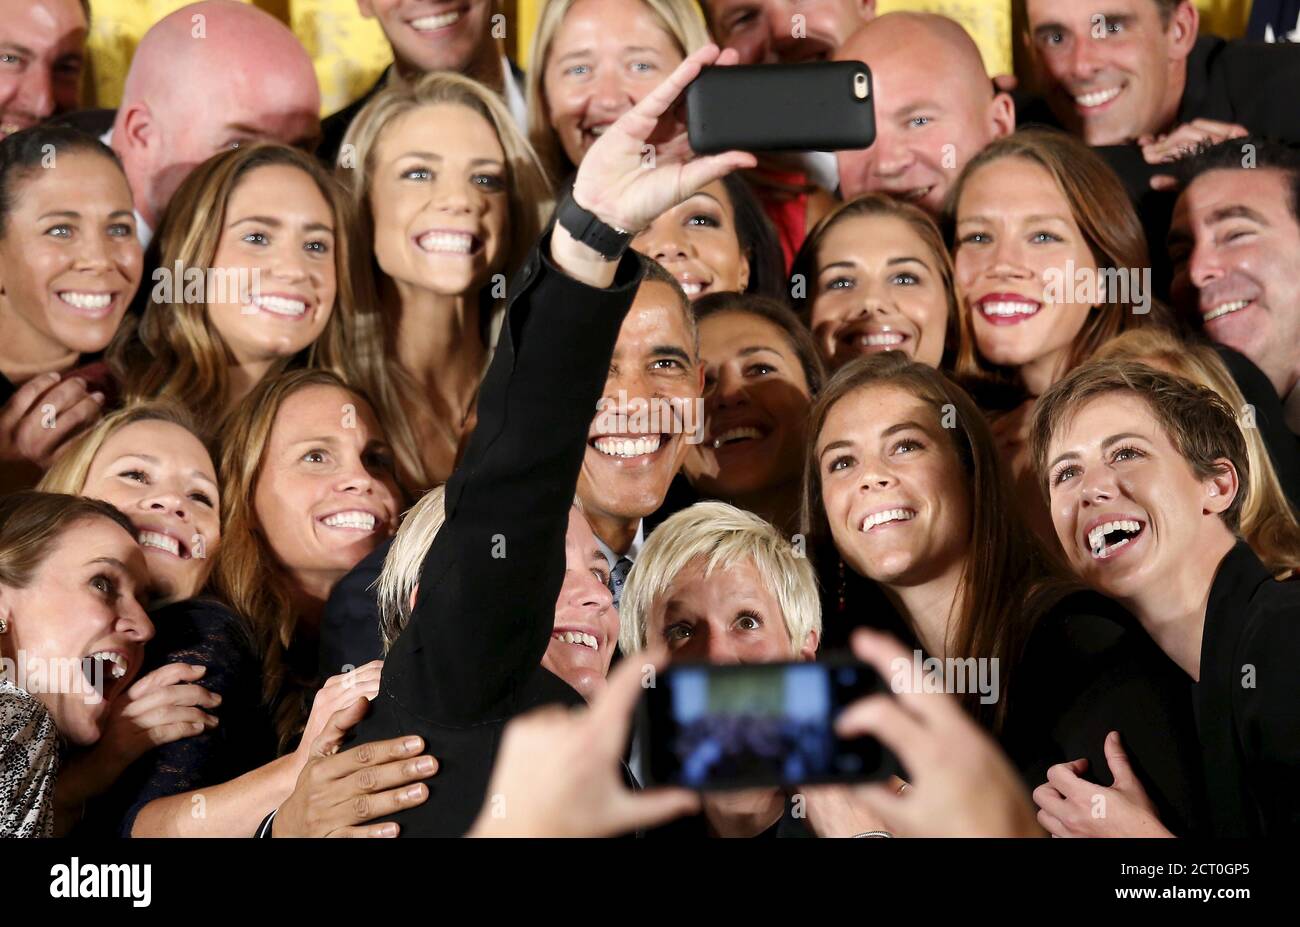 U.S. President Barack Obama poses for a selfie taken by veteran star player Abby Wambach as he welcomes the United States Women's National Soccer Team to the White House in Washington to honor their victory in the 2015 FIFA Women's World Cup, October 27, 2015. REUTERS/Kevin Lamarque       TPX IMAGES OF THE DAY Stock Photo